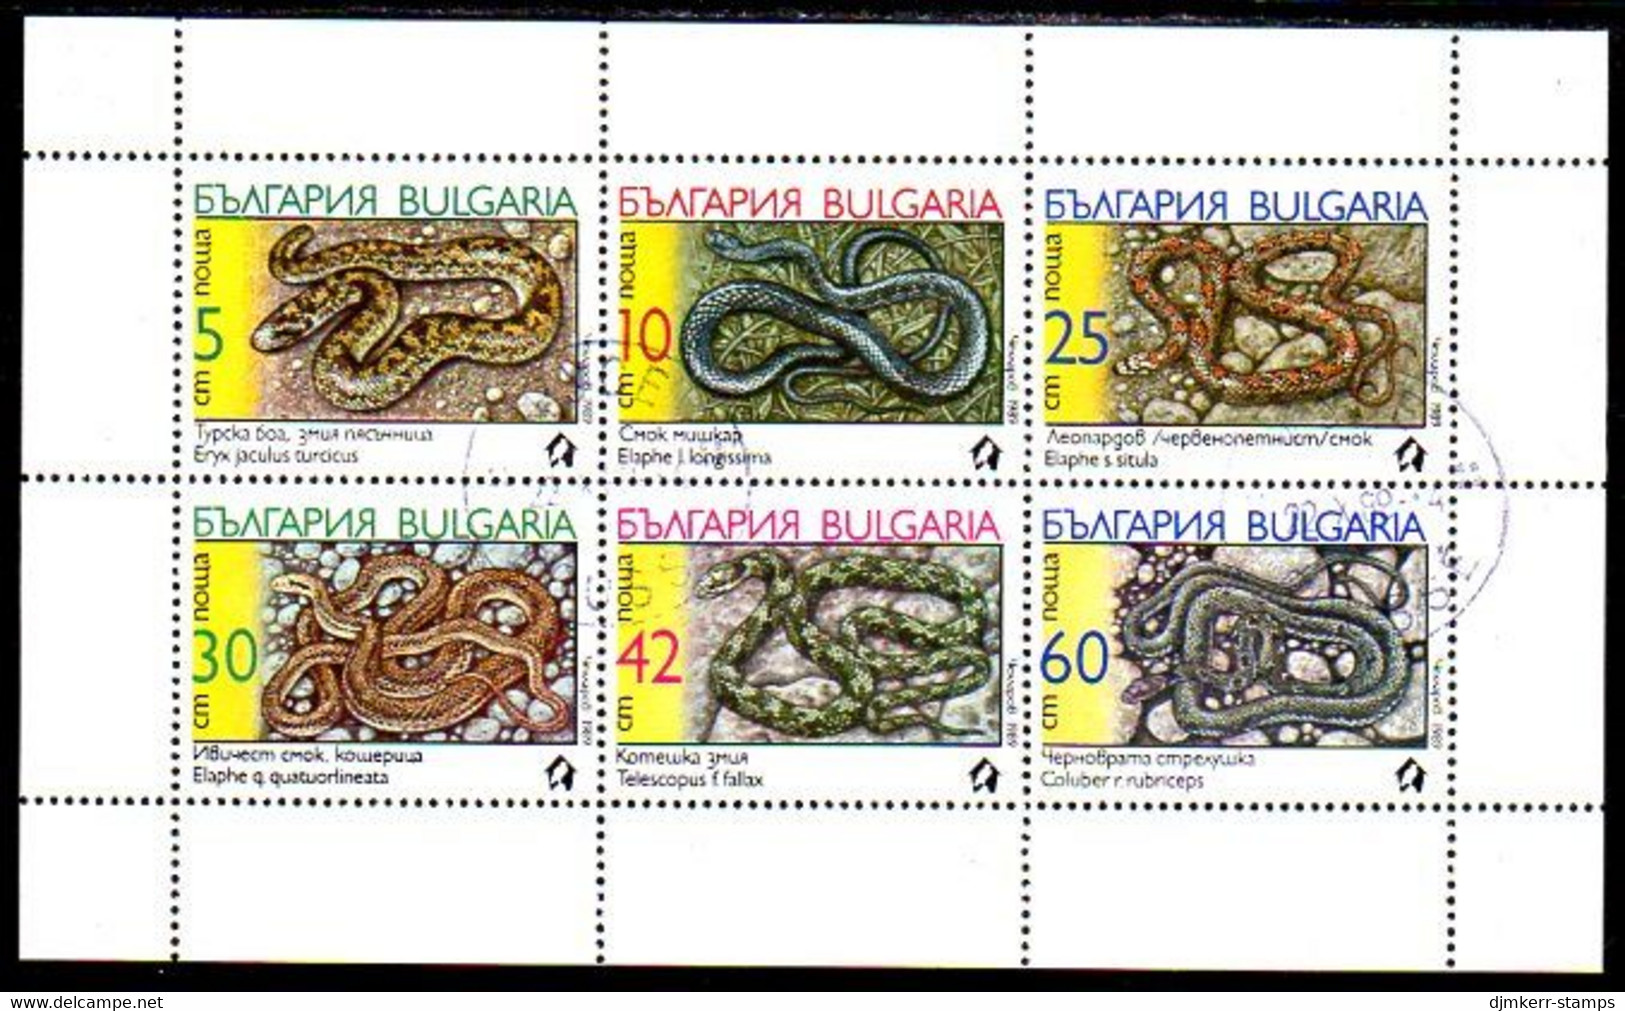 BULGARIA 1989 Snakes Sheetlet Used.  Michel 3784-89 Kb - Used Stamps